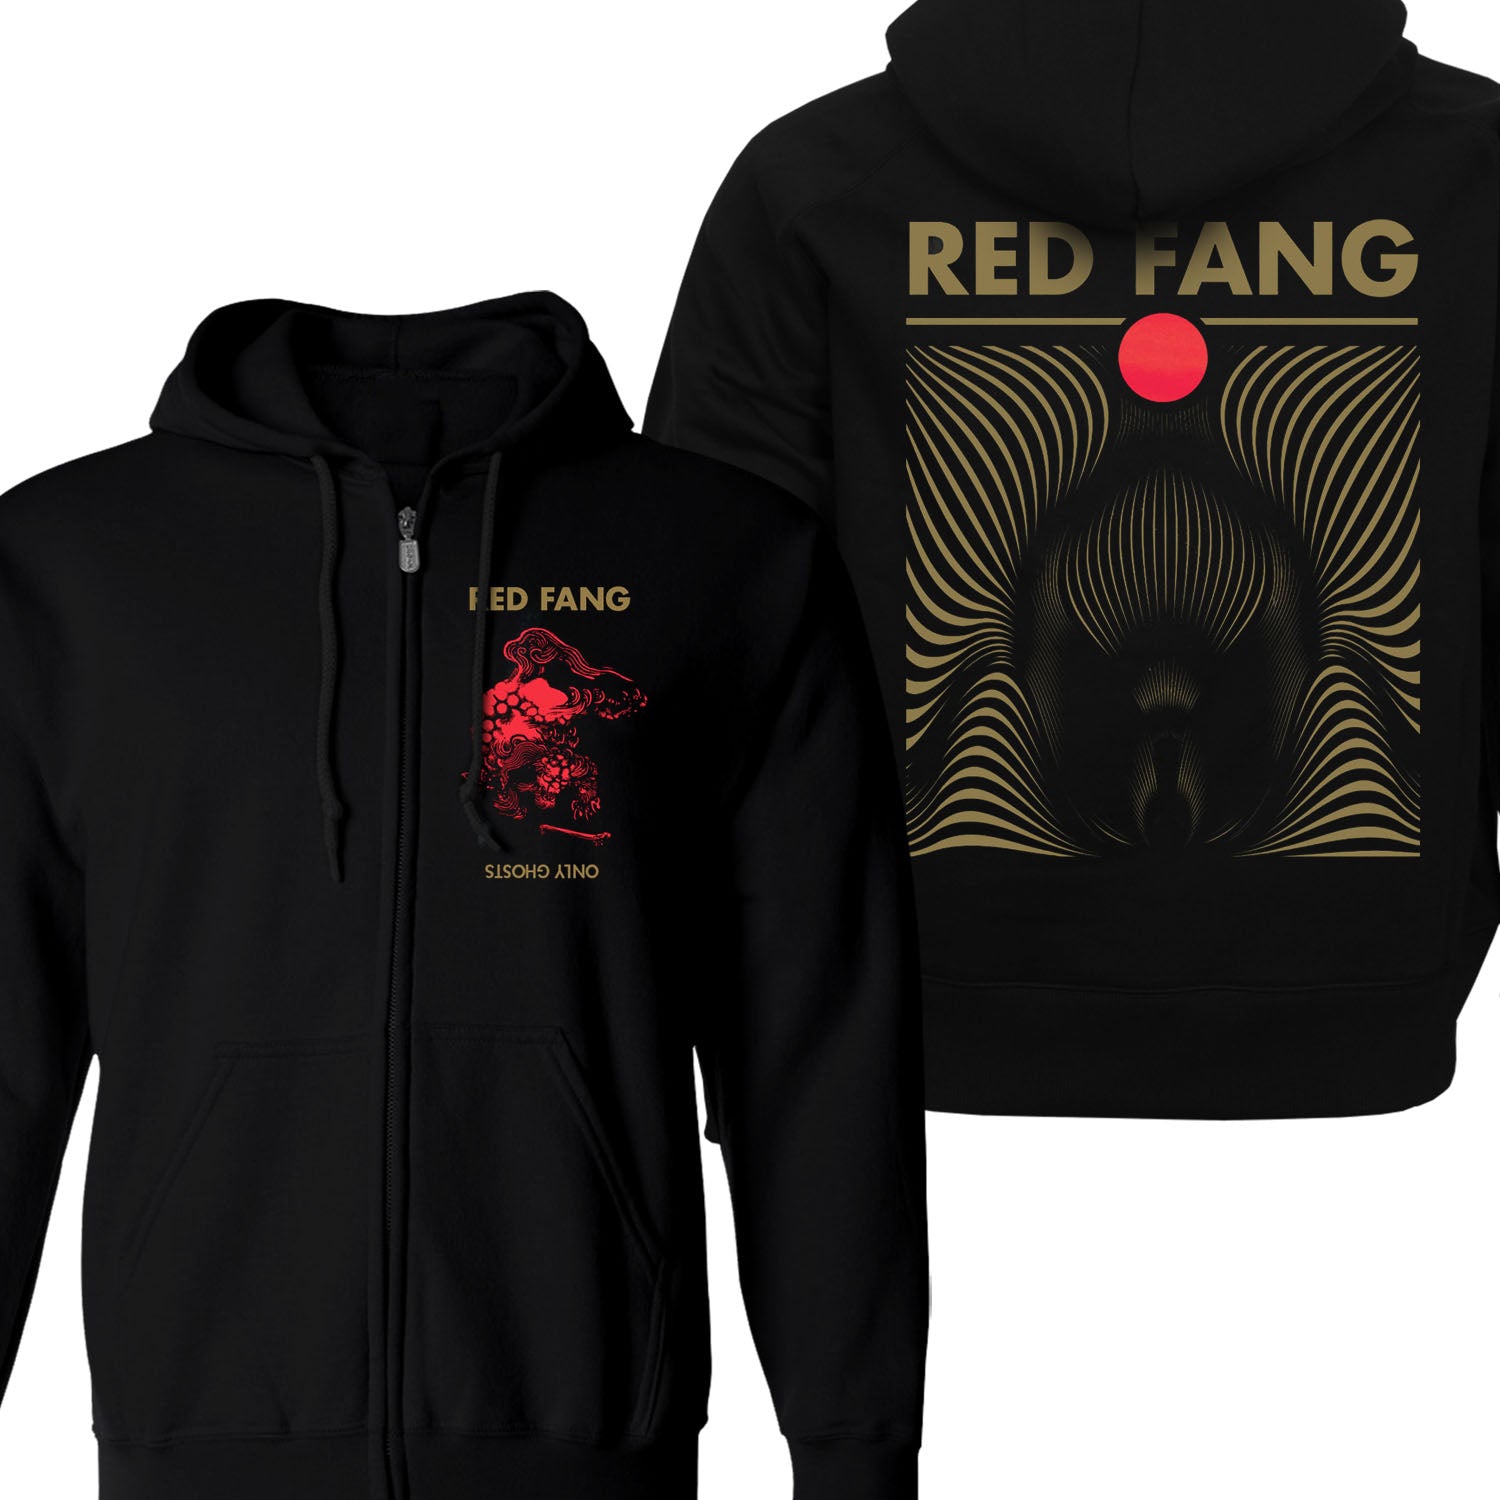 Red Fang "Only Ghosts" Zip Hoodie